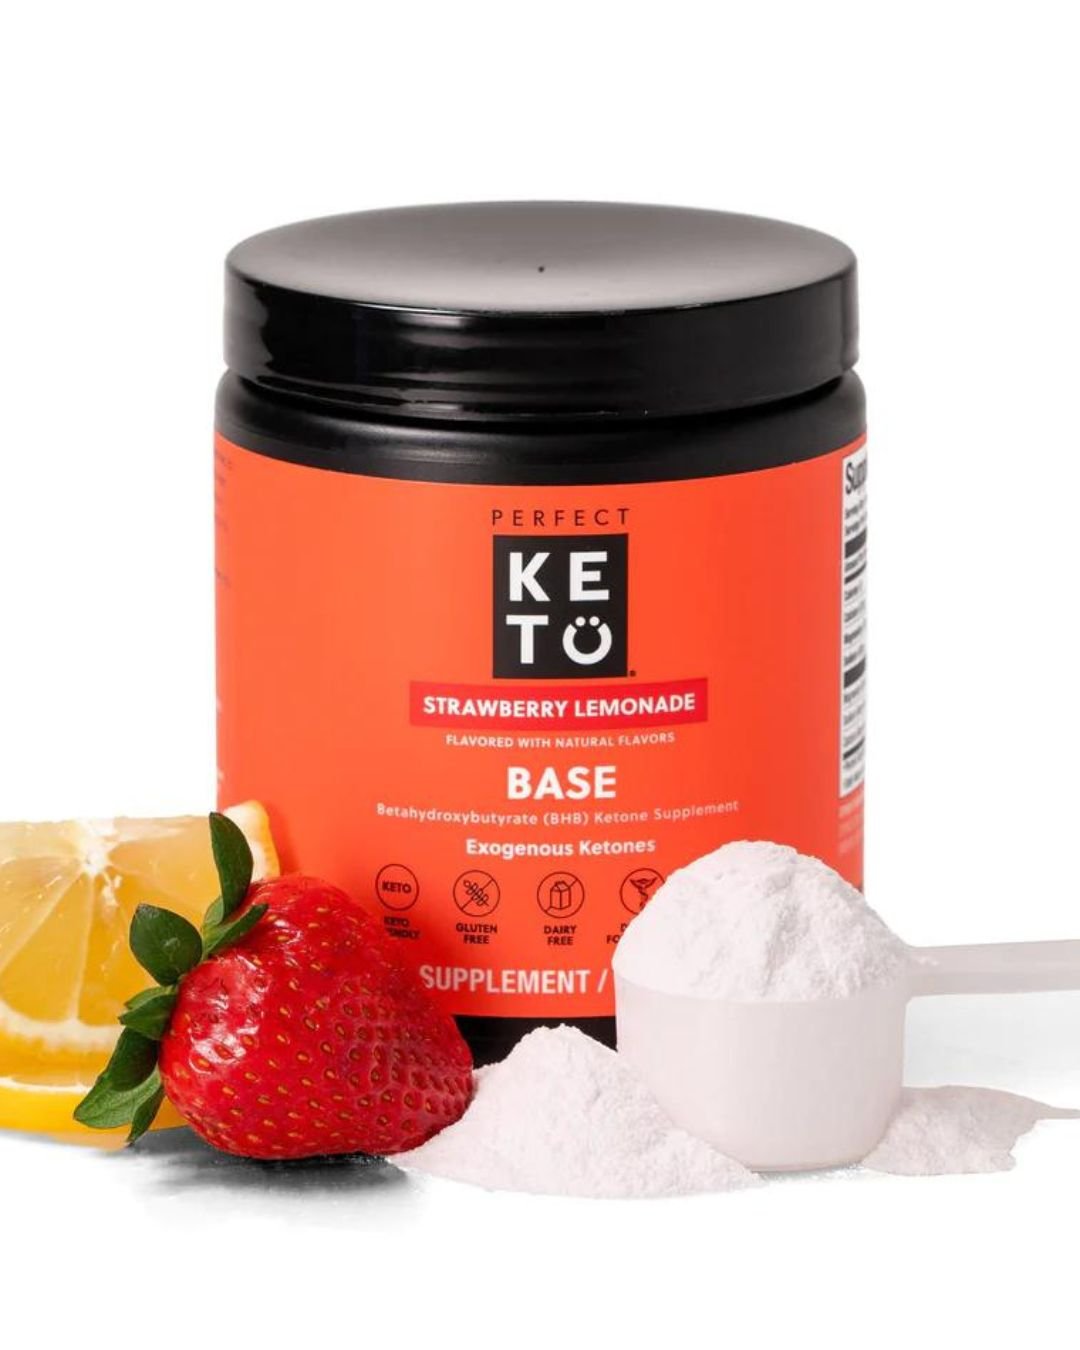 Perfect Keto's Daily Electrolytes are some of our favorites when it comes to on-the-go electrolytes. They are a convenient way to ensure you get enough sodium, potassium, magnesium, and calcium. Just mix them into water or your favorite beverage and